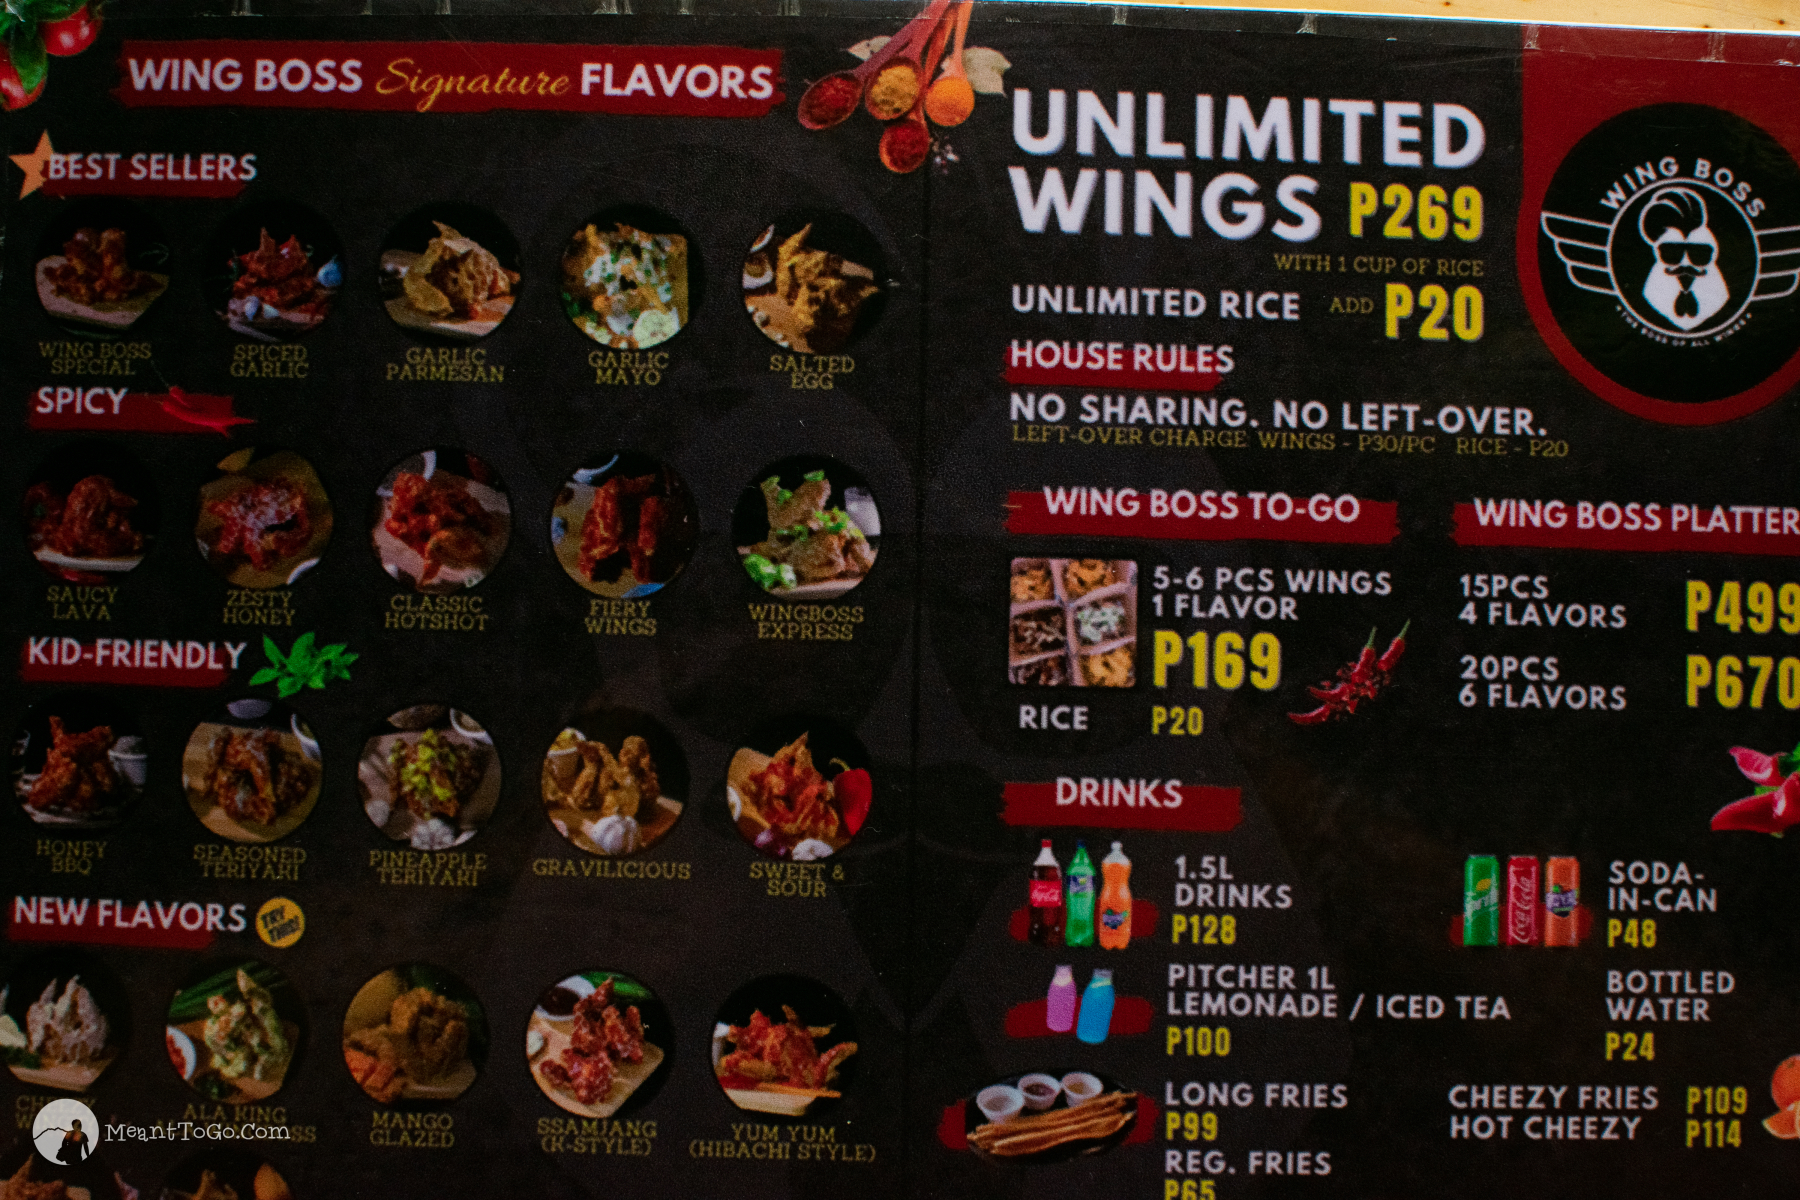 Unlimited chicken wings at WING BOSS